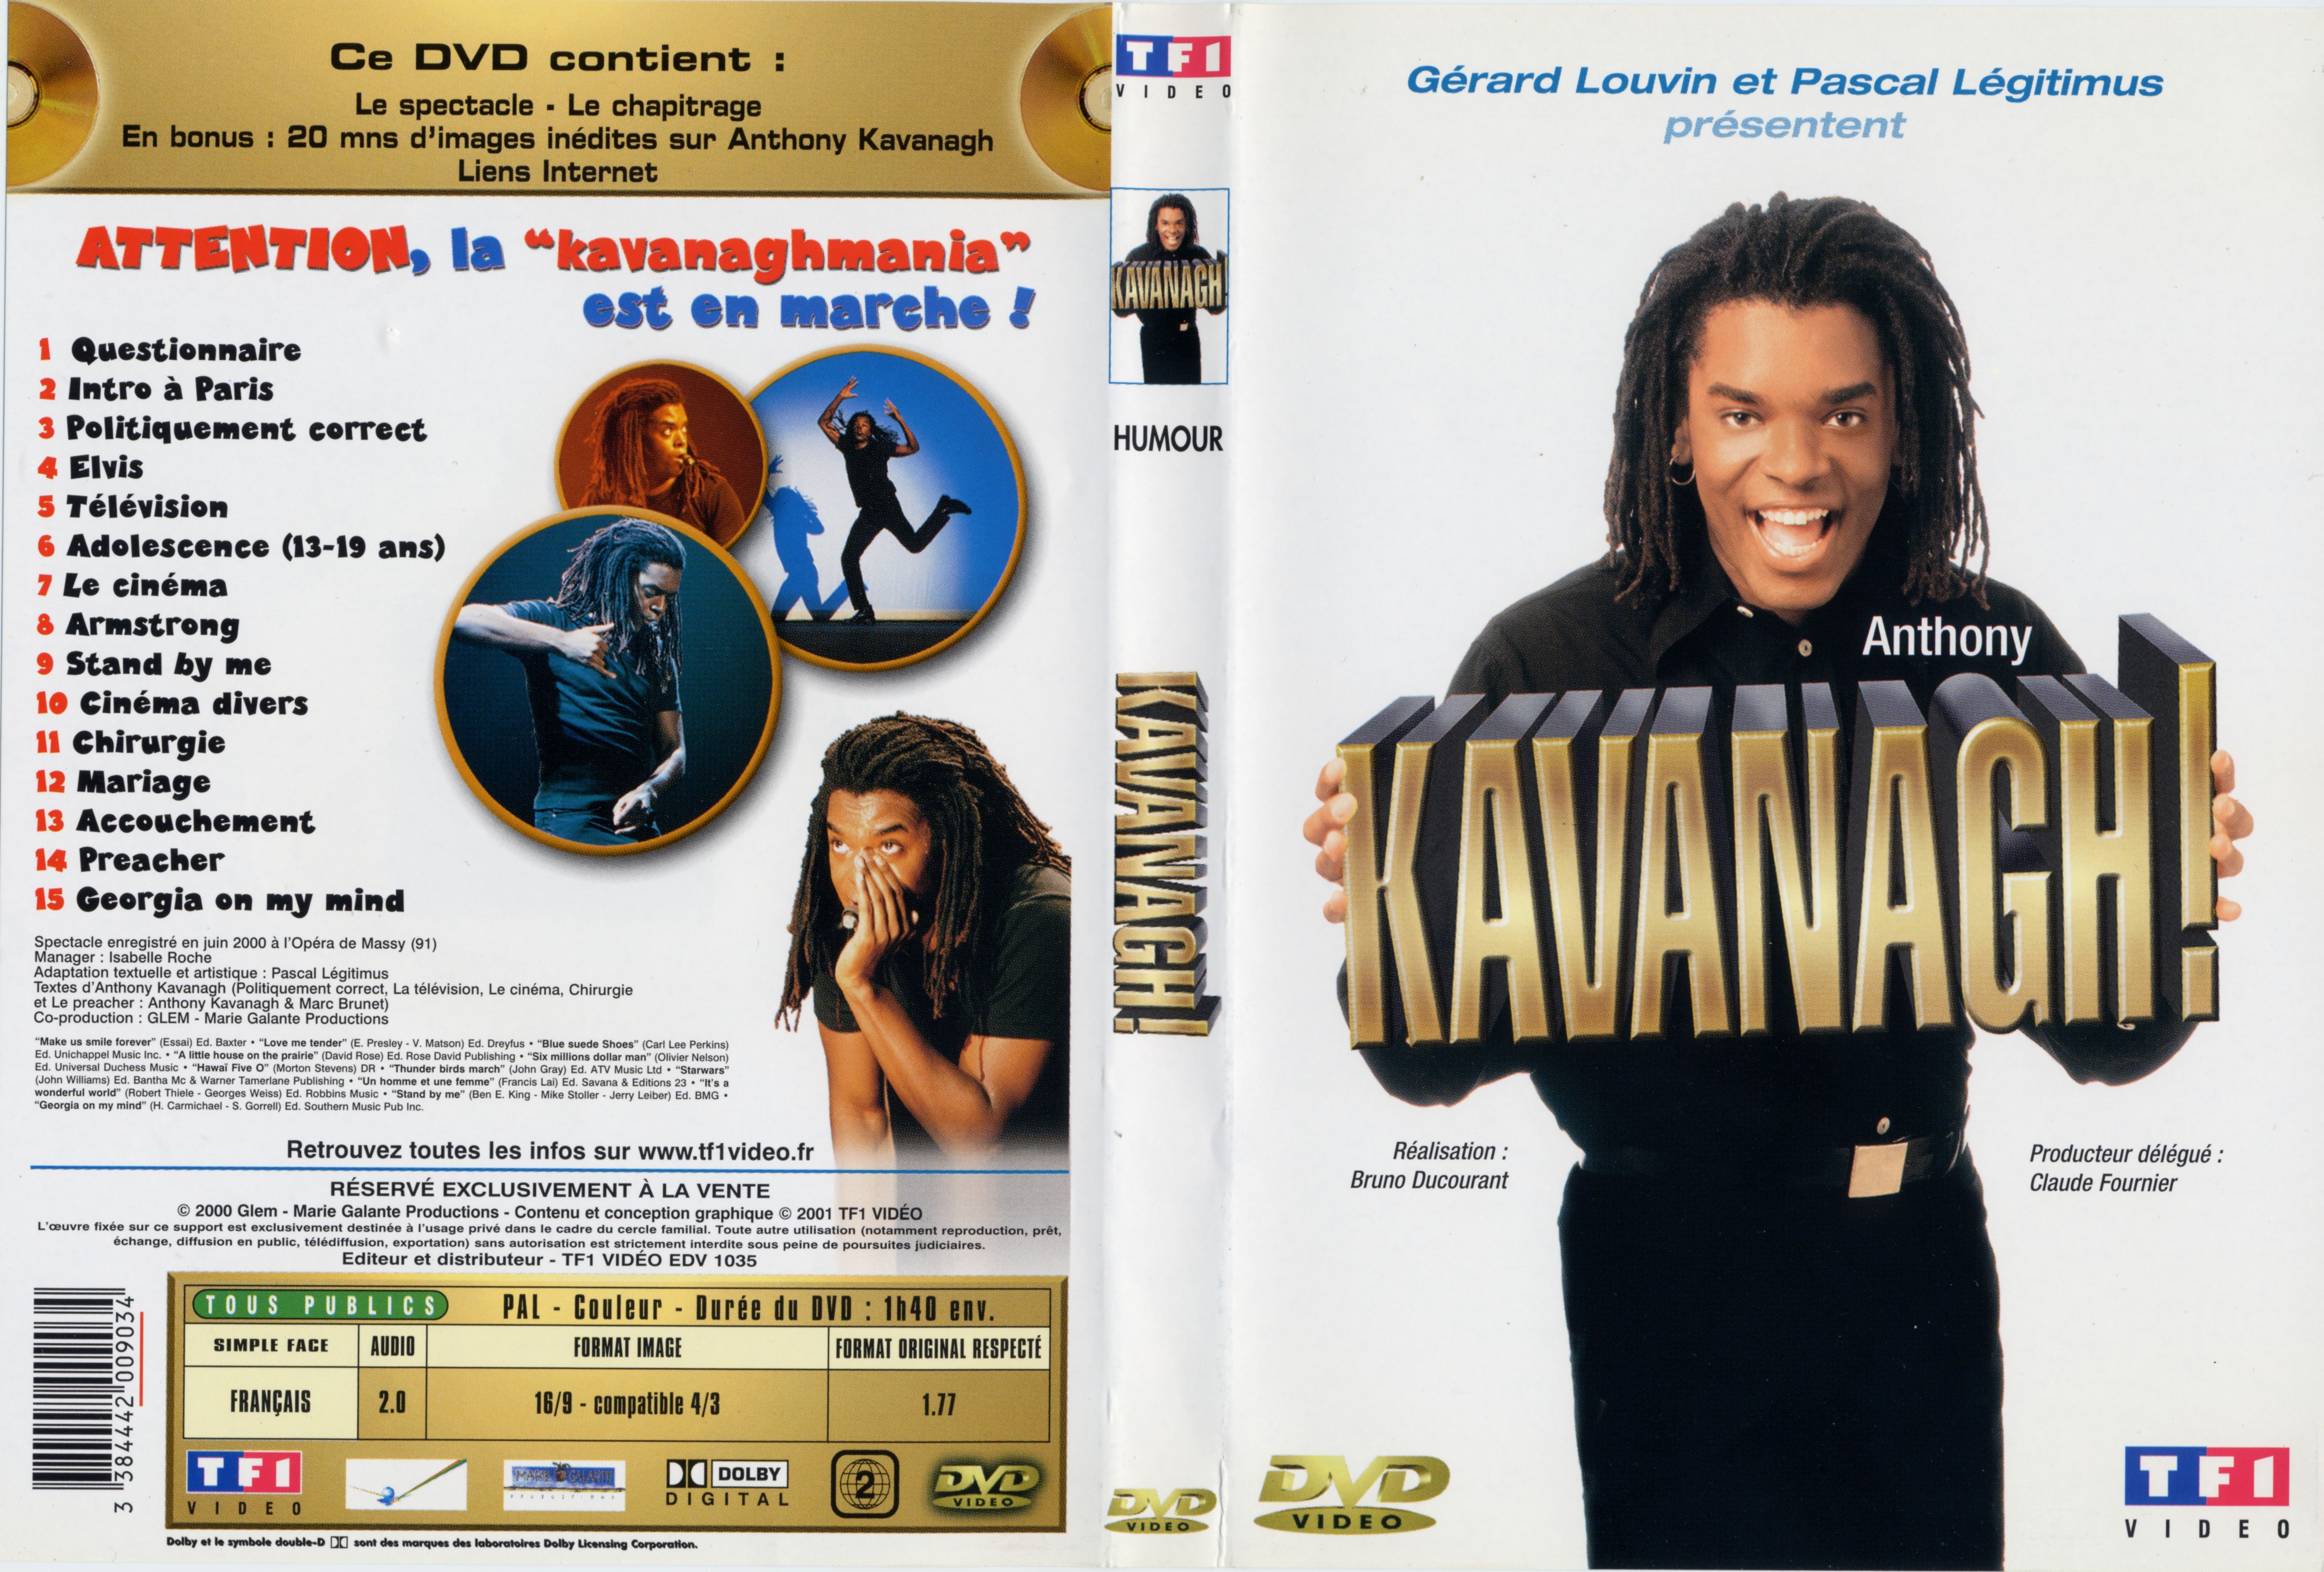 Jaquette DVD Anthony Kavanagh